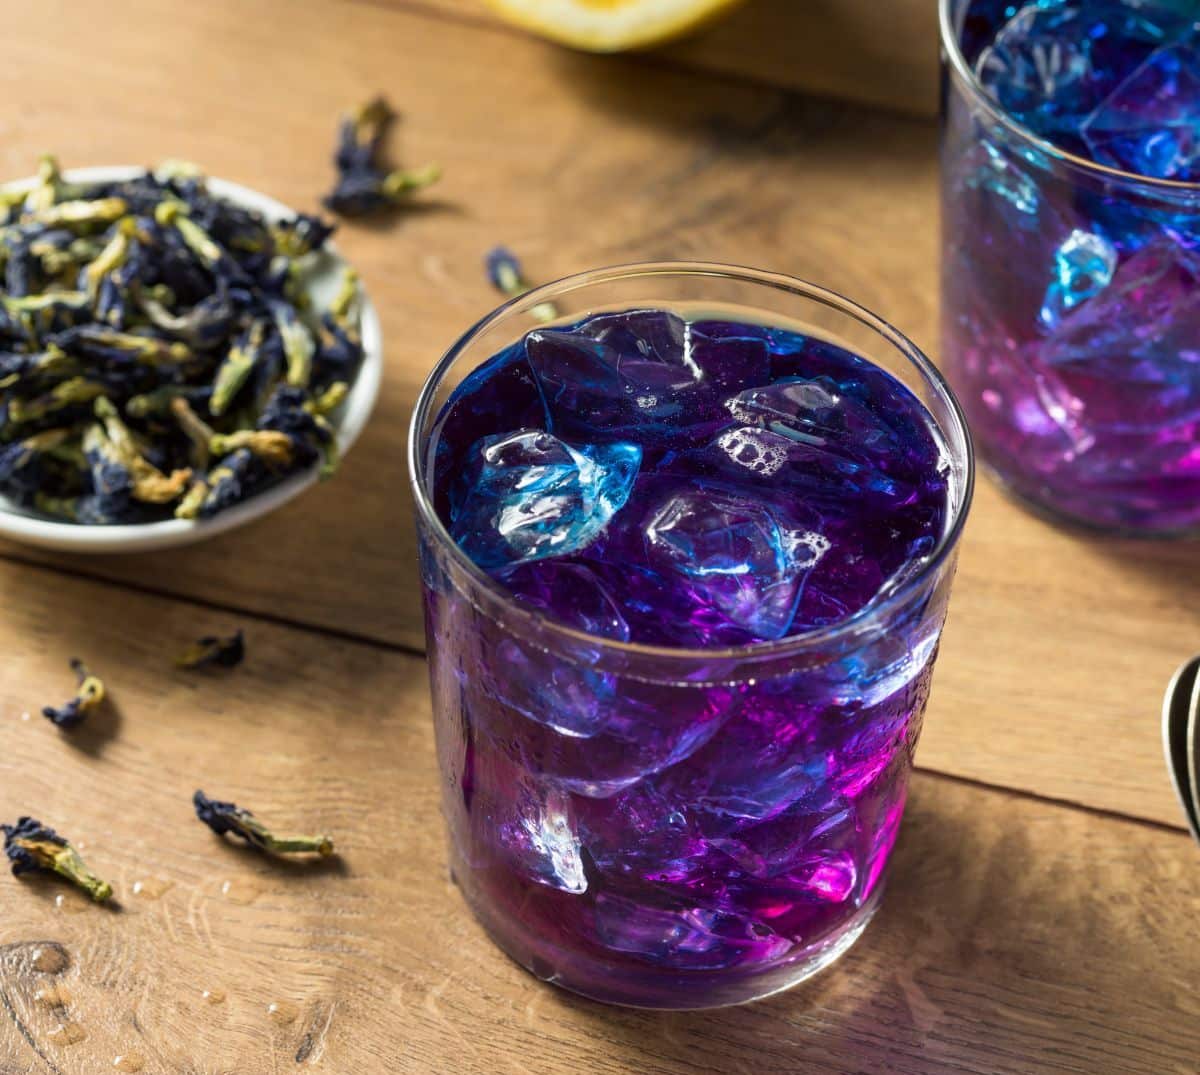 Butterfly pea sirup